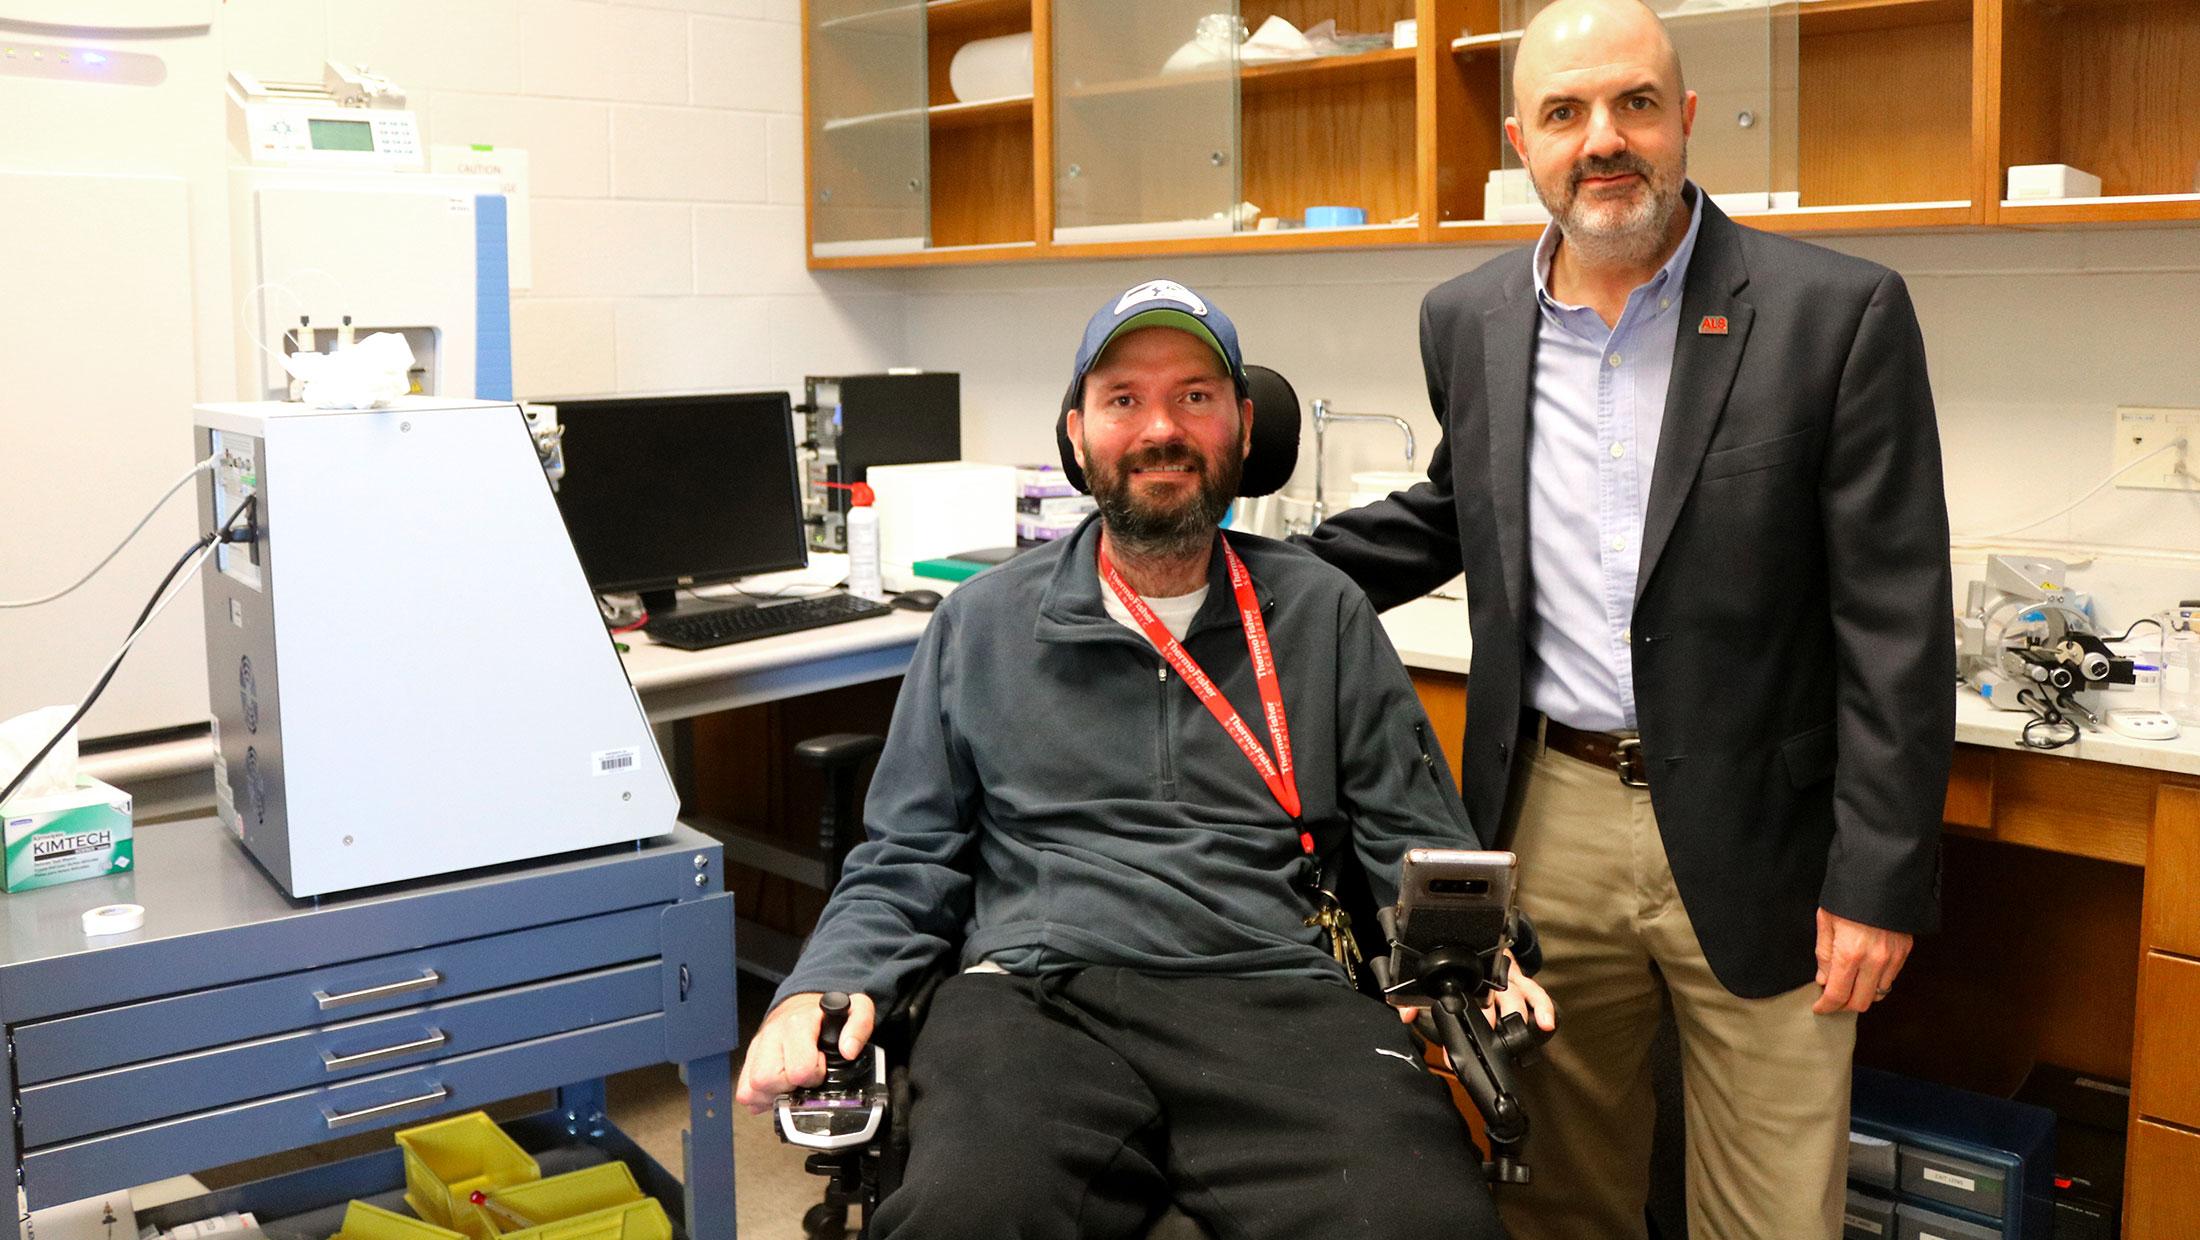 ALS Association Funded Research Finds Path Forward in